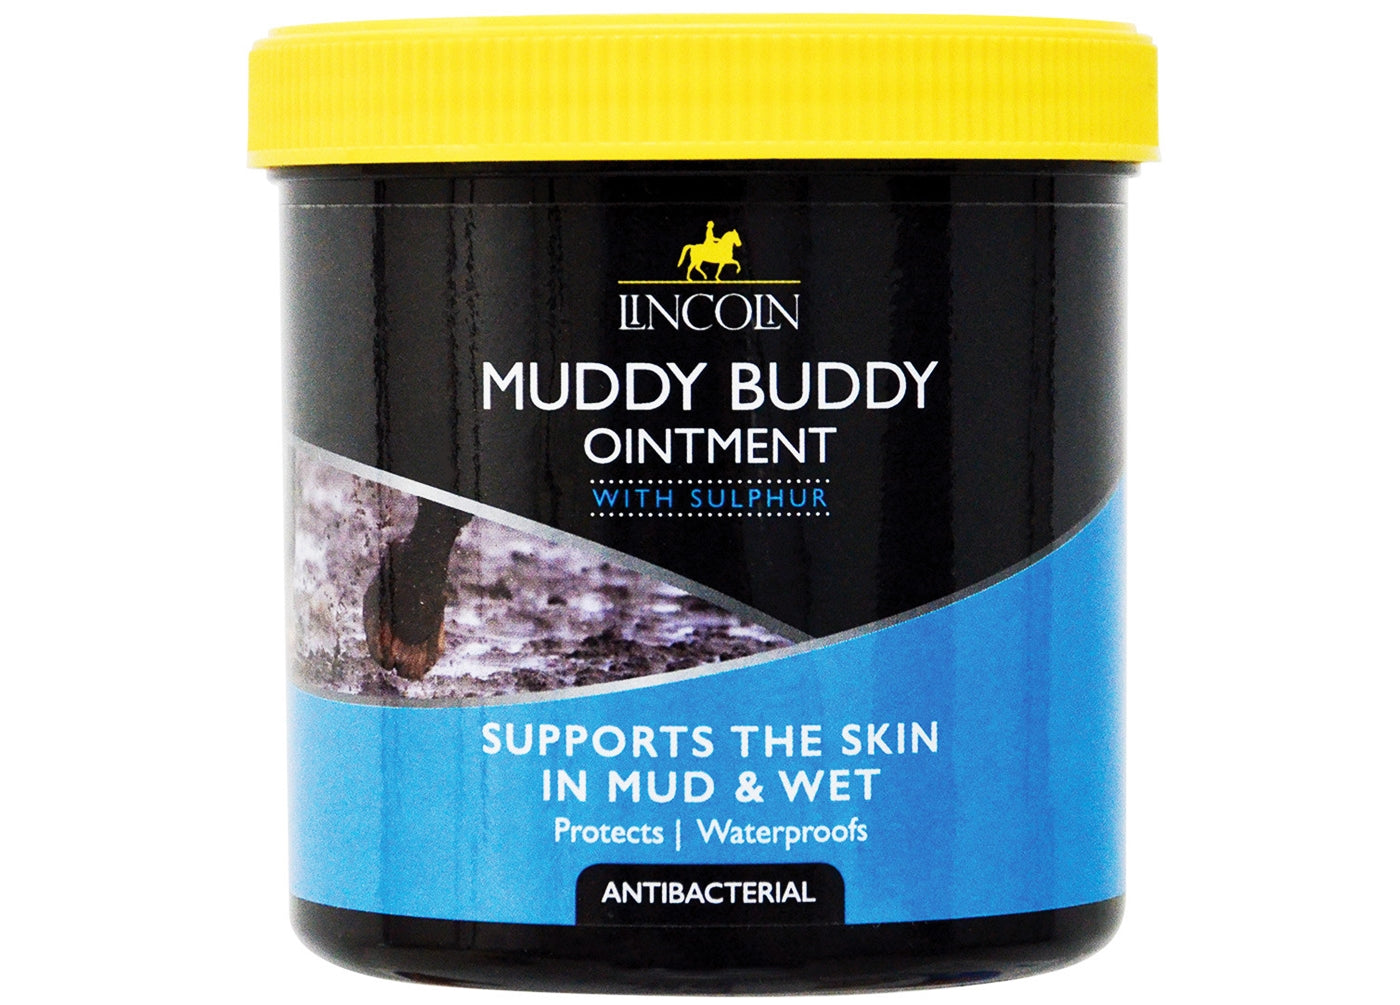 Lincoln - Muddy Buddy Ointment 500g - Buy Online SPR Centre UK